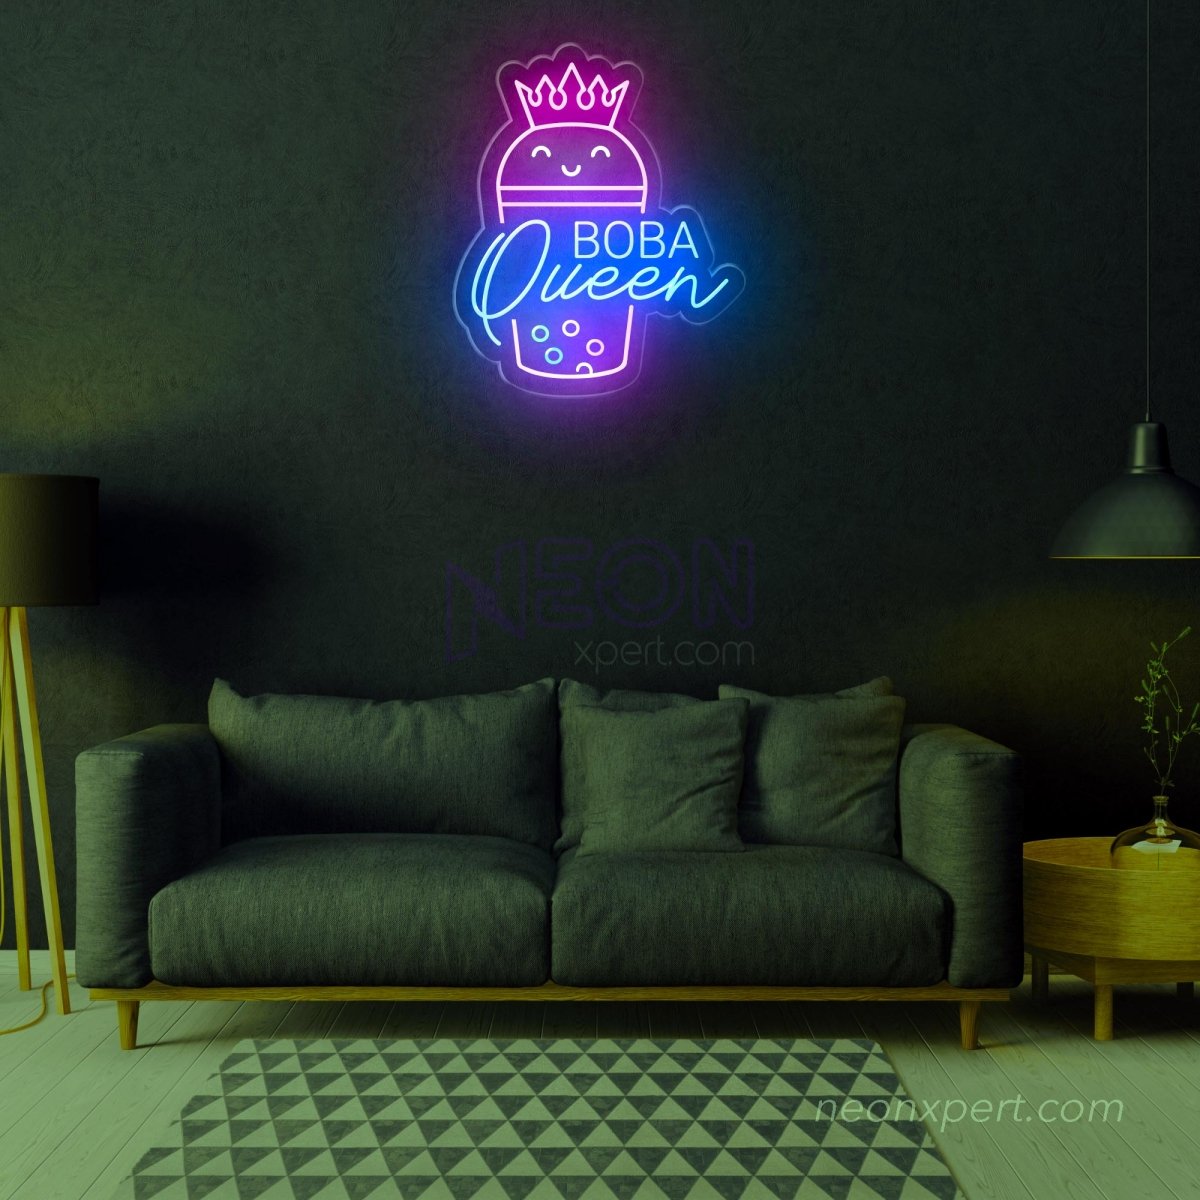 Boba Queen Neon Sign - Vibrant LED Light for Boba Enthusiasts - NeonXpert